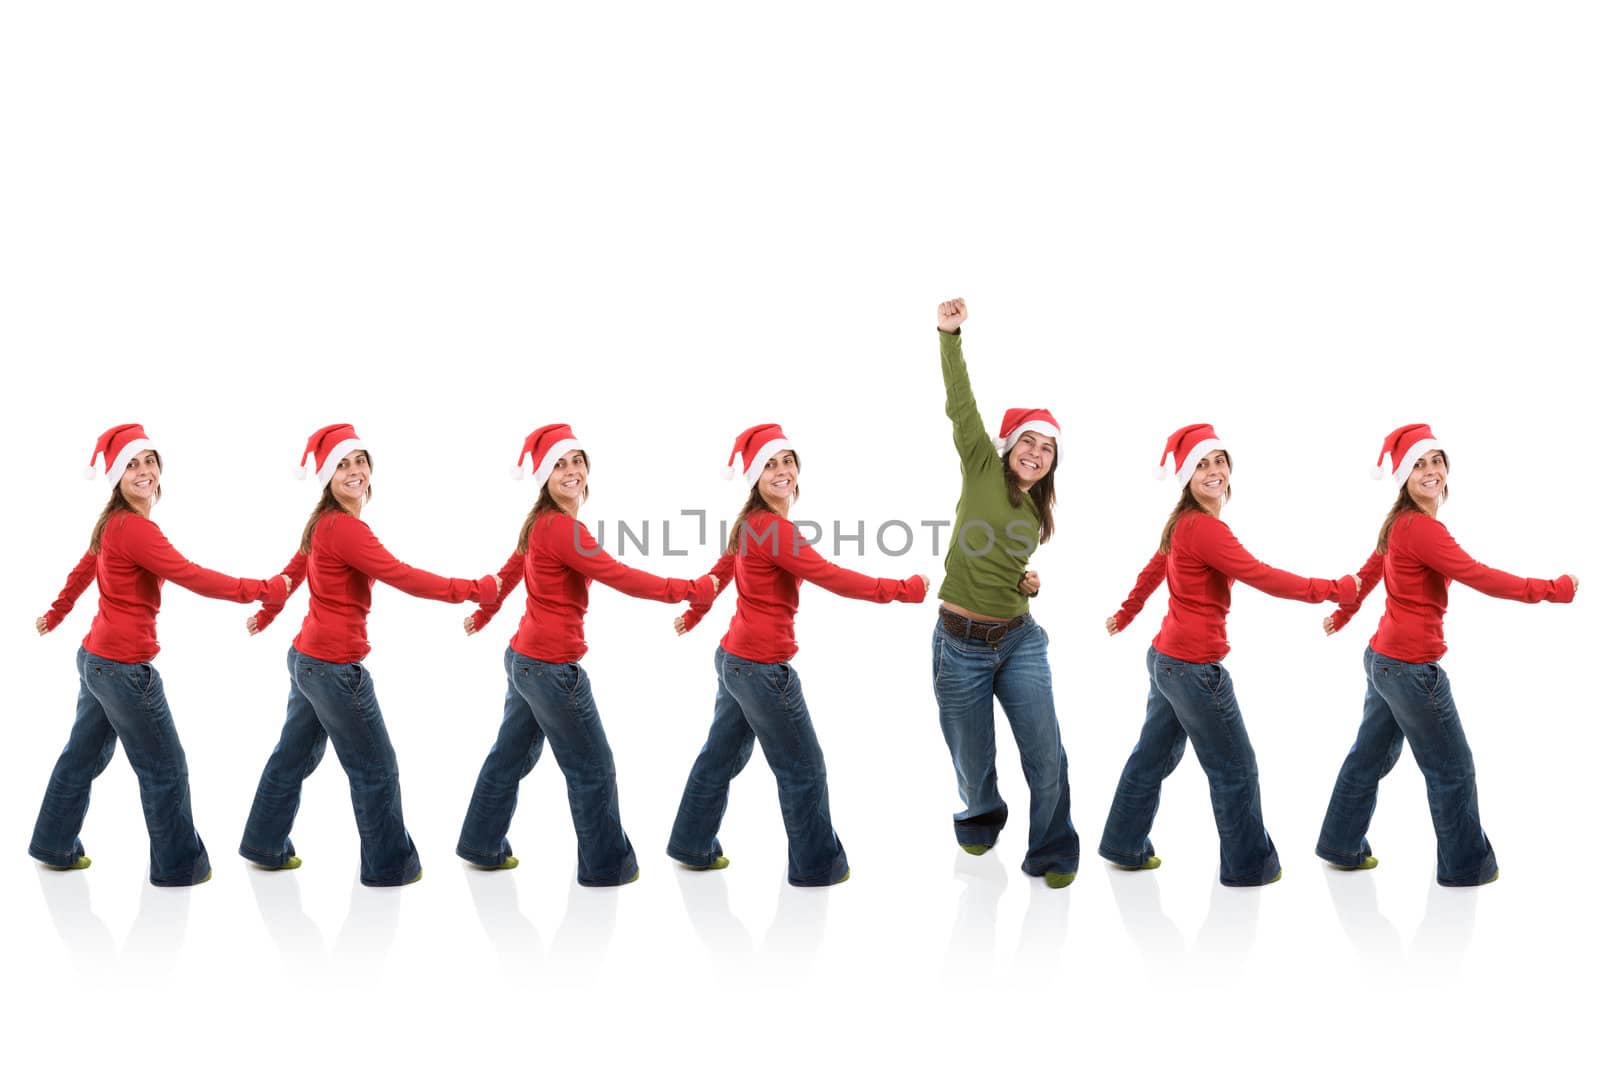 group of santa claus women in line with one breaking the pattern and jumping in happiness. isolated on white background.